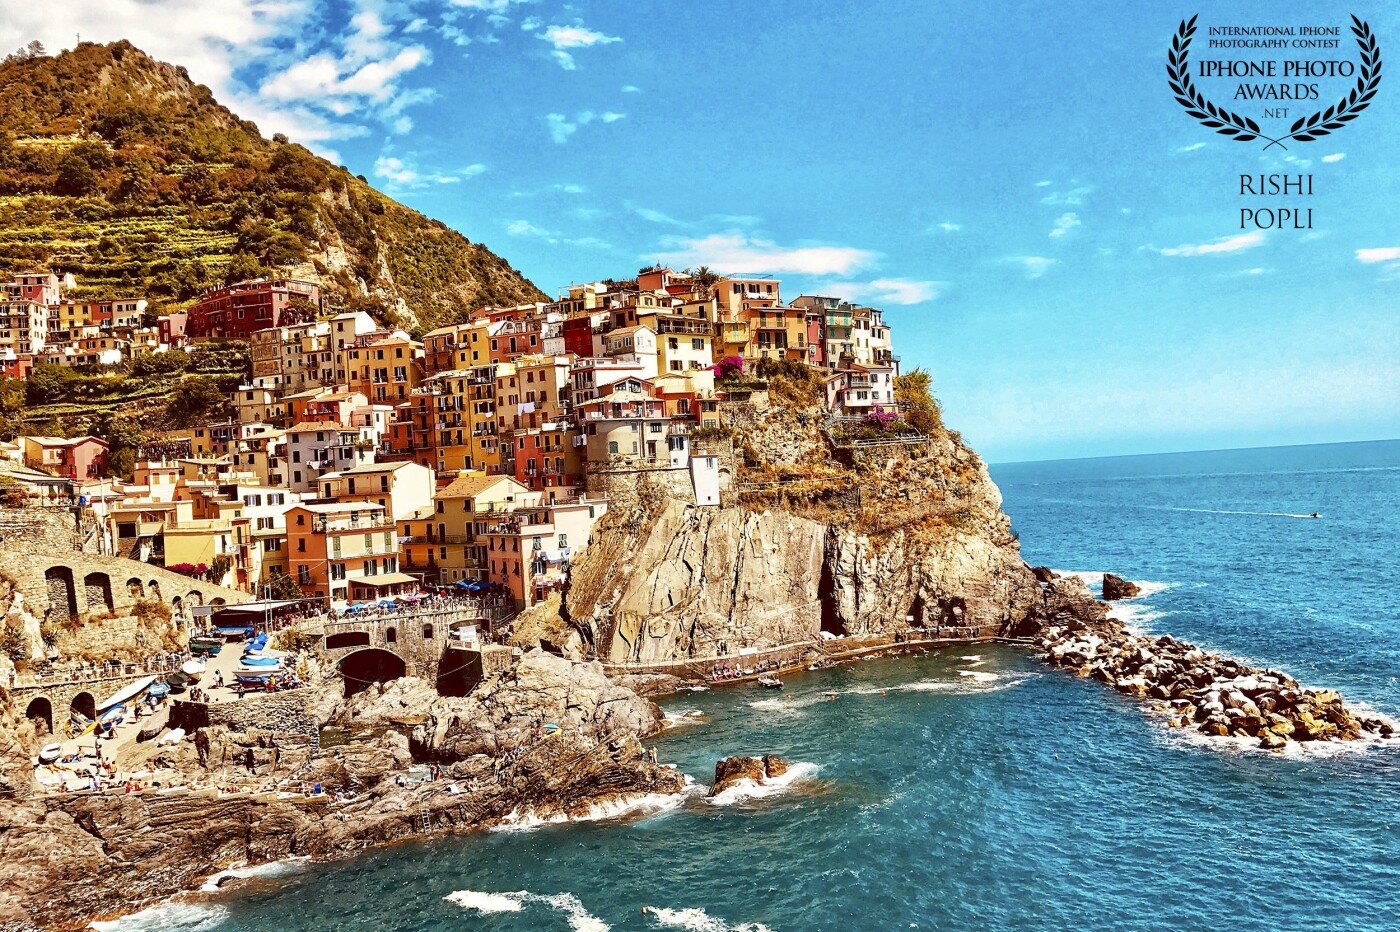 This picture was taken during a family vacation to Cinque Terre Province of La Spezia, Italy. Cinque Terre is a string of seaside villages on the Italian Riviera coastline. 5 towns unique to their look with colorful houses and amazing terrain. I took this photograph in the 4th town of Manarola which I thought was breathtaking.  